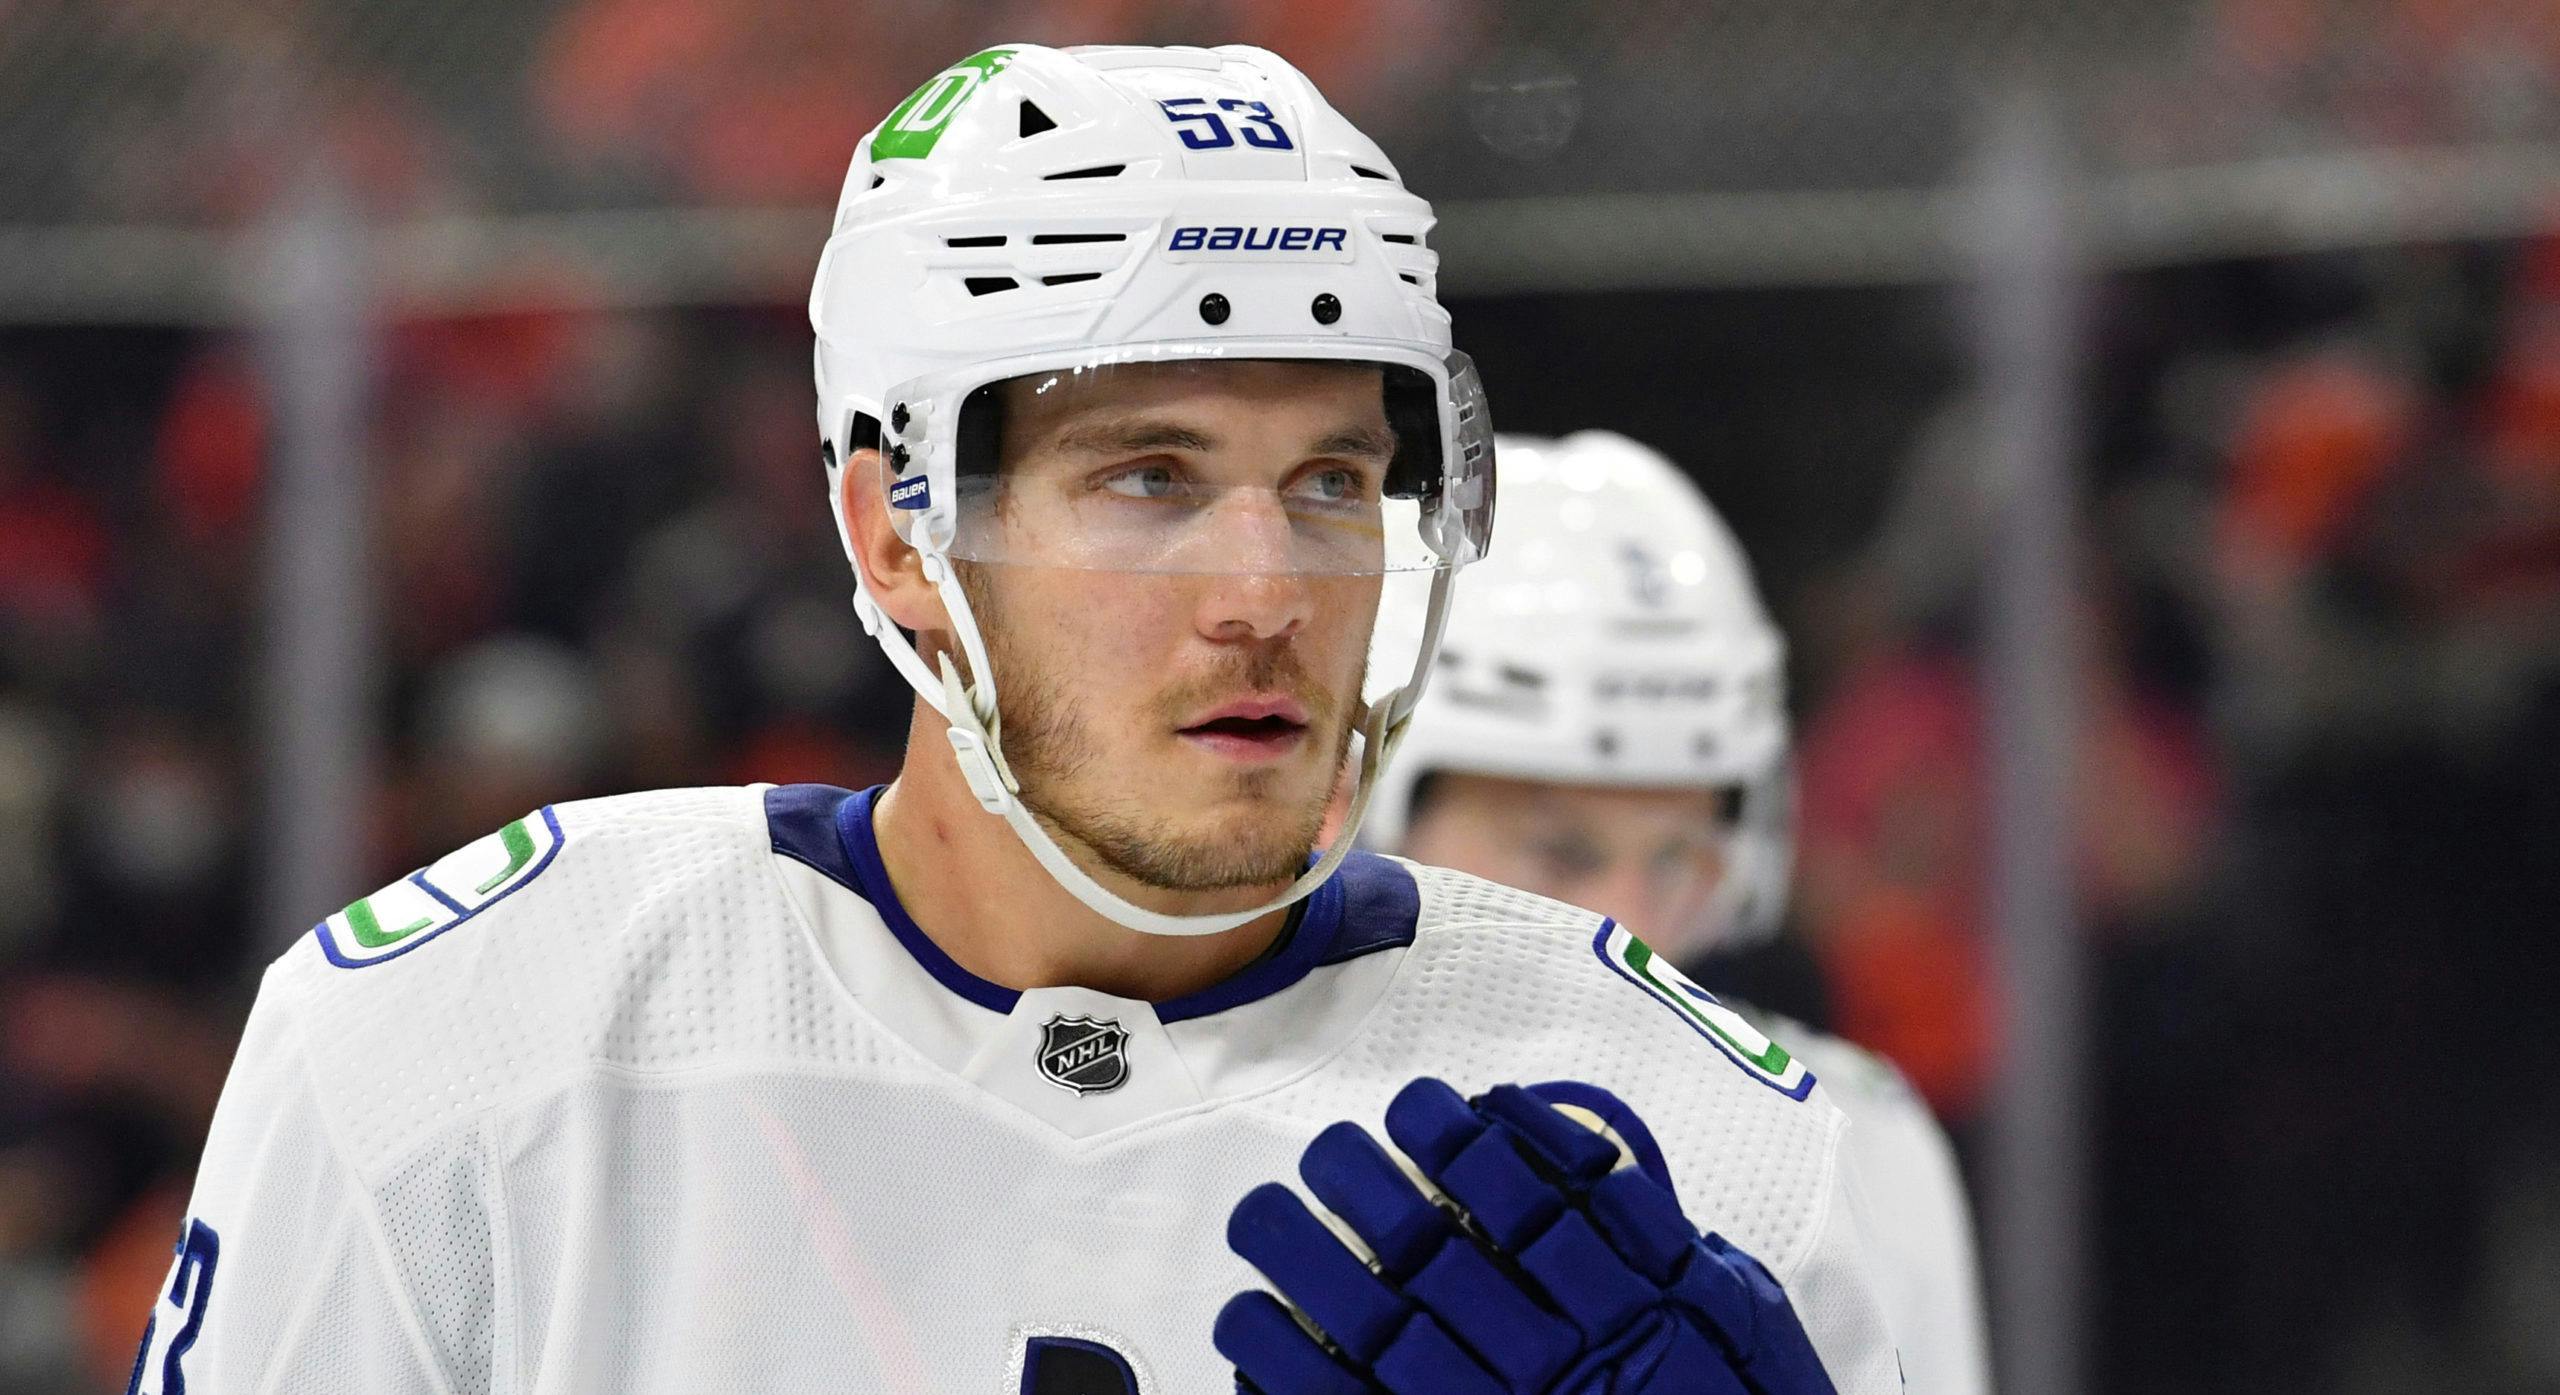 Bo Horvat is putting the Canucks on his back in the playoffs